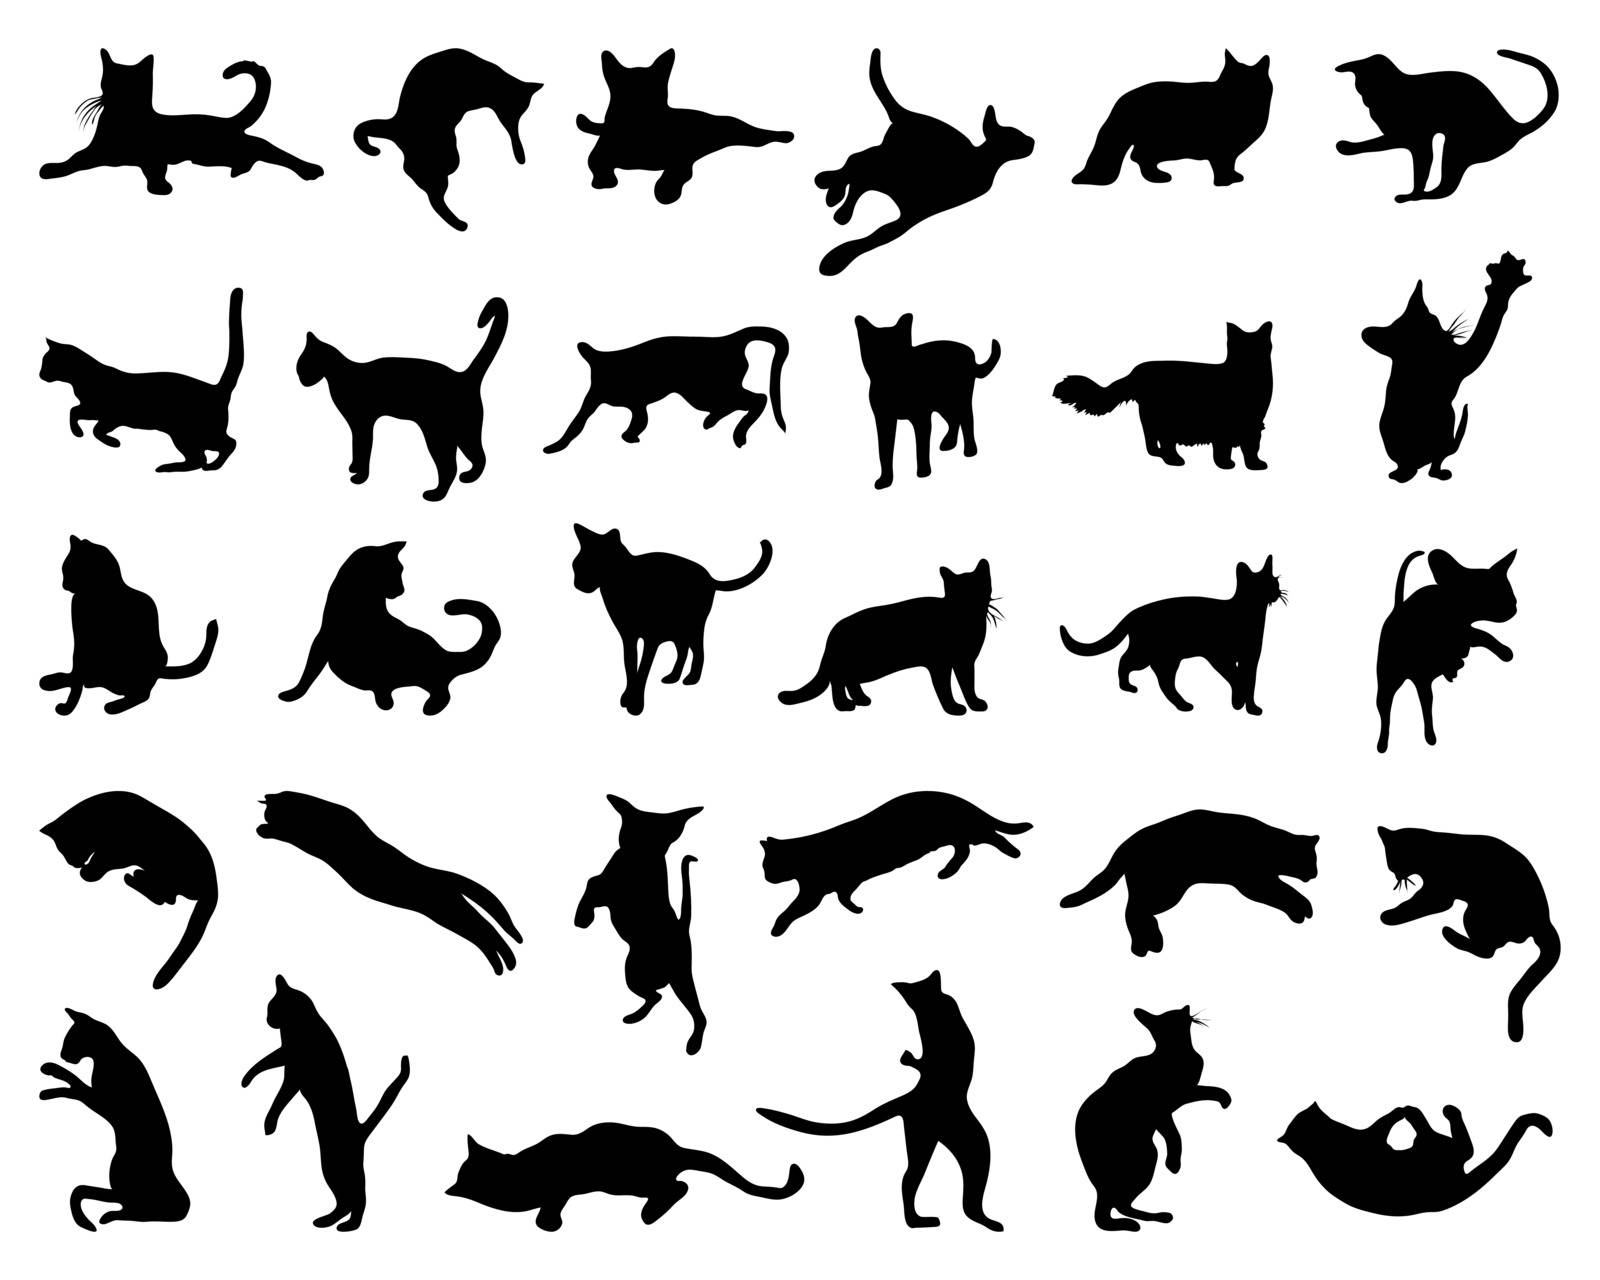 silhouette of cats by ratkomat